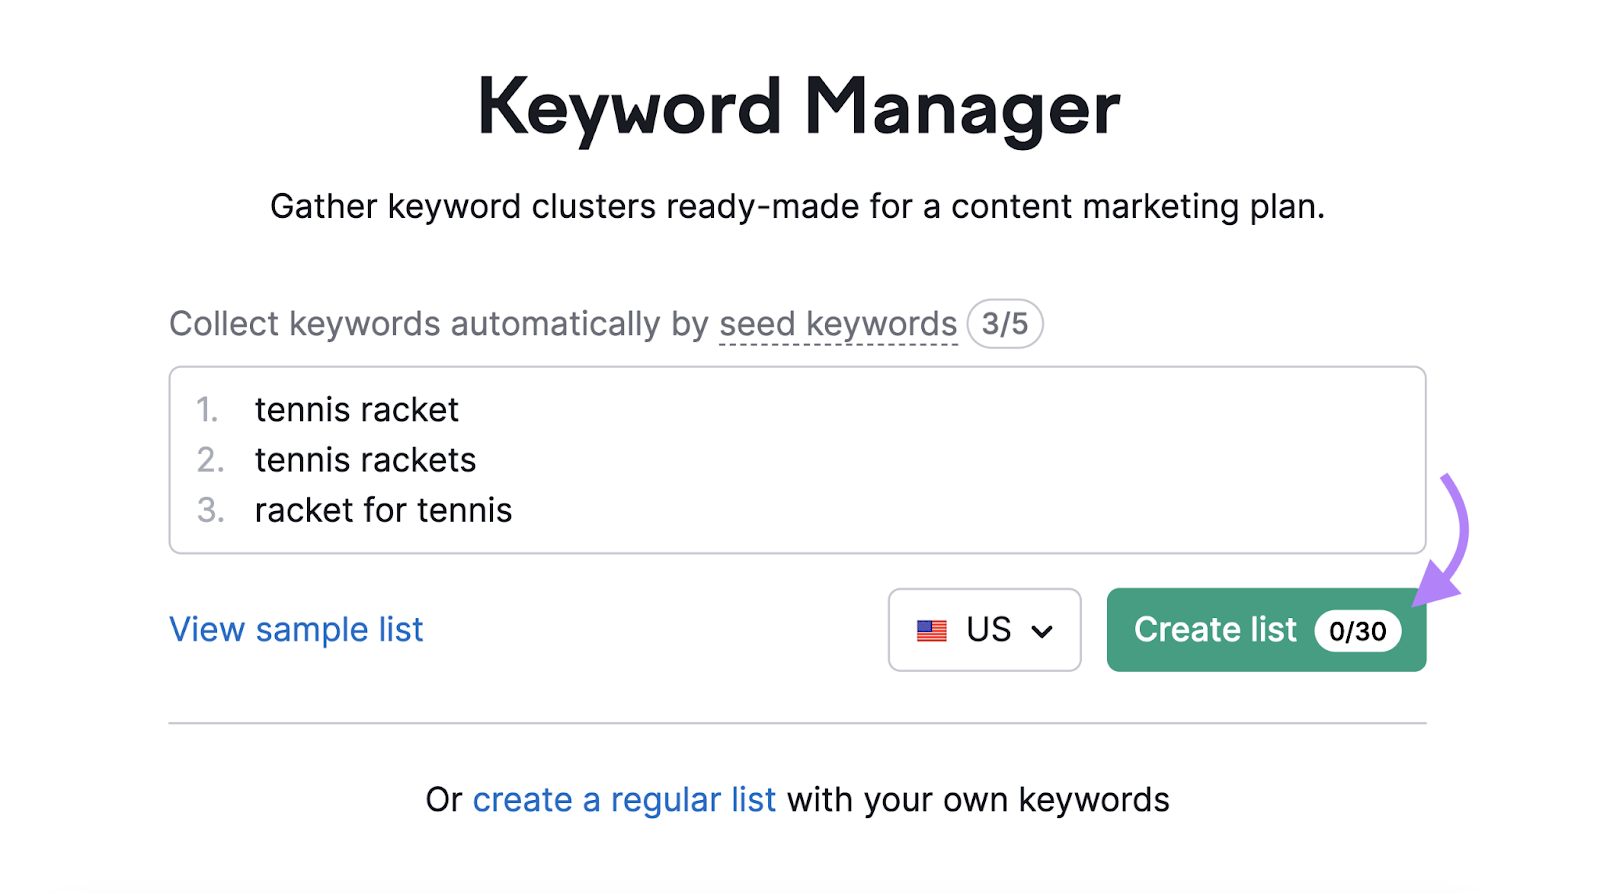 terms tennis racket, tennis rackets, and racket for tennis entered into keyword manager tool